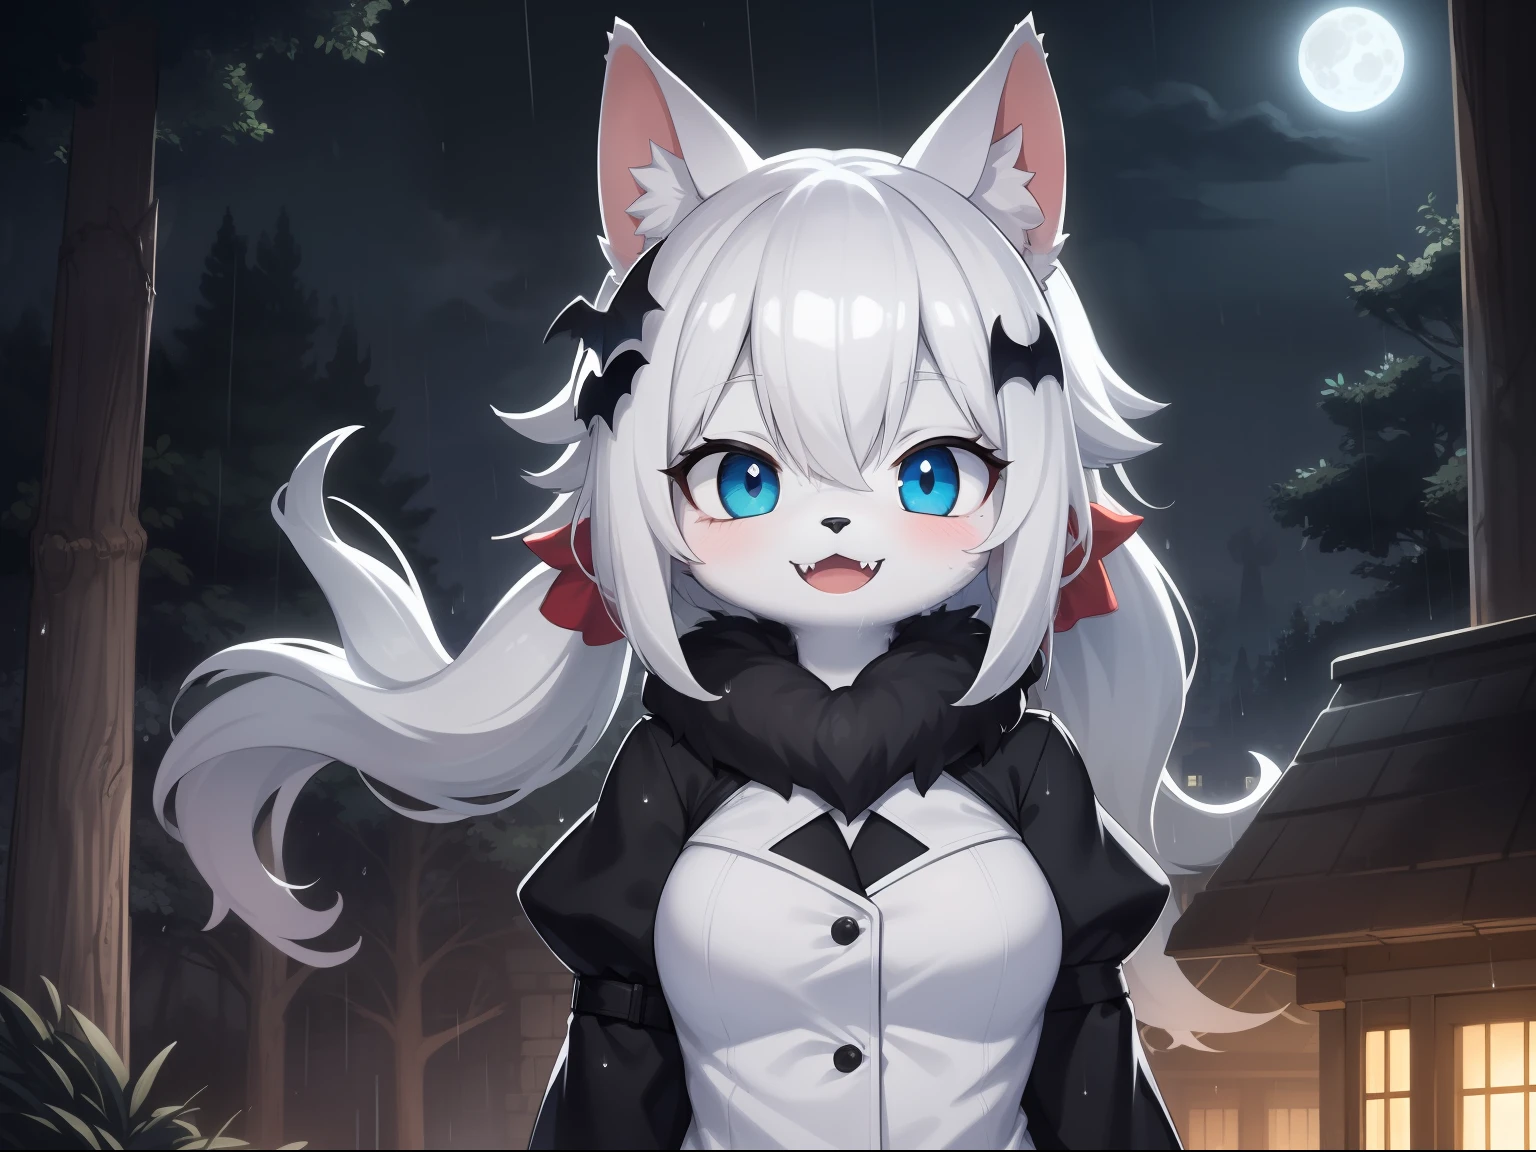 Cat Girl，was hairy，shaggy，Skin fur，White fur，Forelimb hands，hair splayed out，White ears，White face fur，White hair, hair splayed out, Shiny hair，Long hair，Hairline,  low twintails，Blue eyes，Super cute face，Happy, full face blush, smiley，Empty eyes， fangs，bat hair ornament，White dress，Ambient light，Ultra-fine fur，Volumetric eye, bangs, light and darkcontrast, ultra high def, Masterpiece, Super detail，Forest ruins background，crow，Night，A starry sky，full moon，Under the rain，In the rain，Drizzle，Wet with rain，rainy outside，High quality, ultra high def, high resolution, Anatomically correct